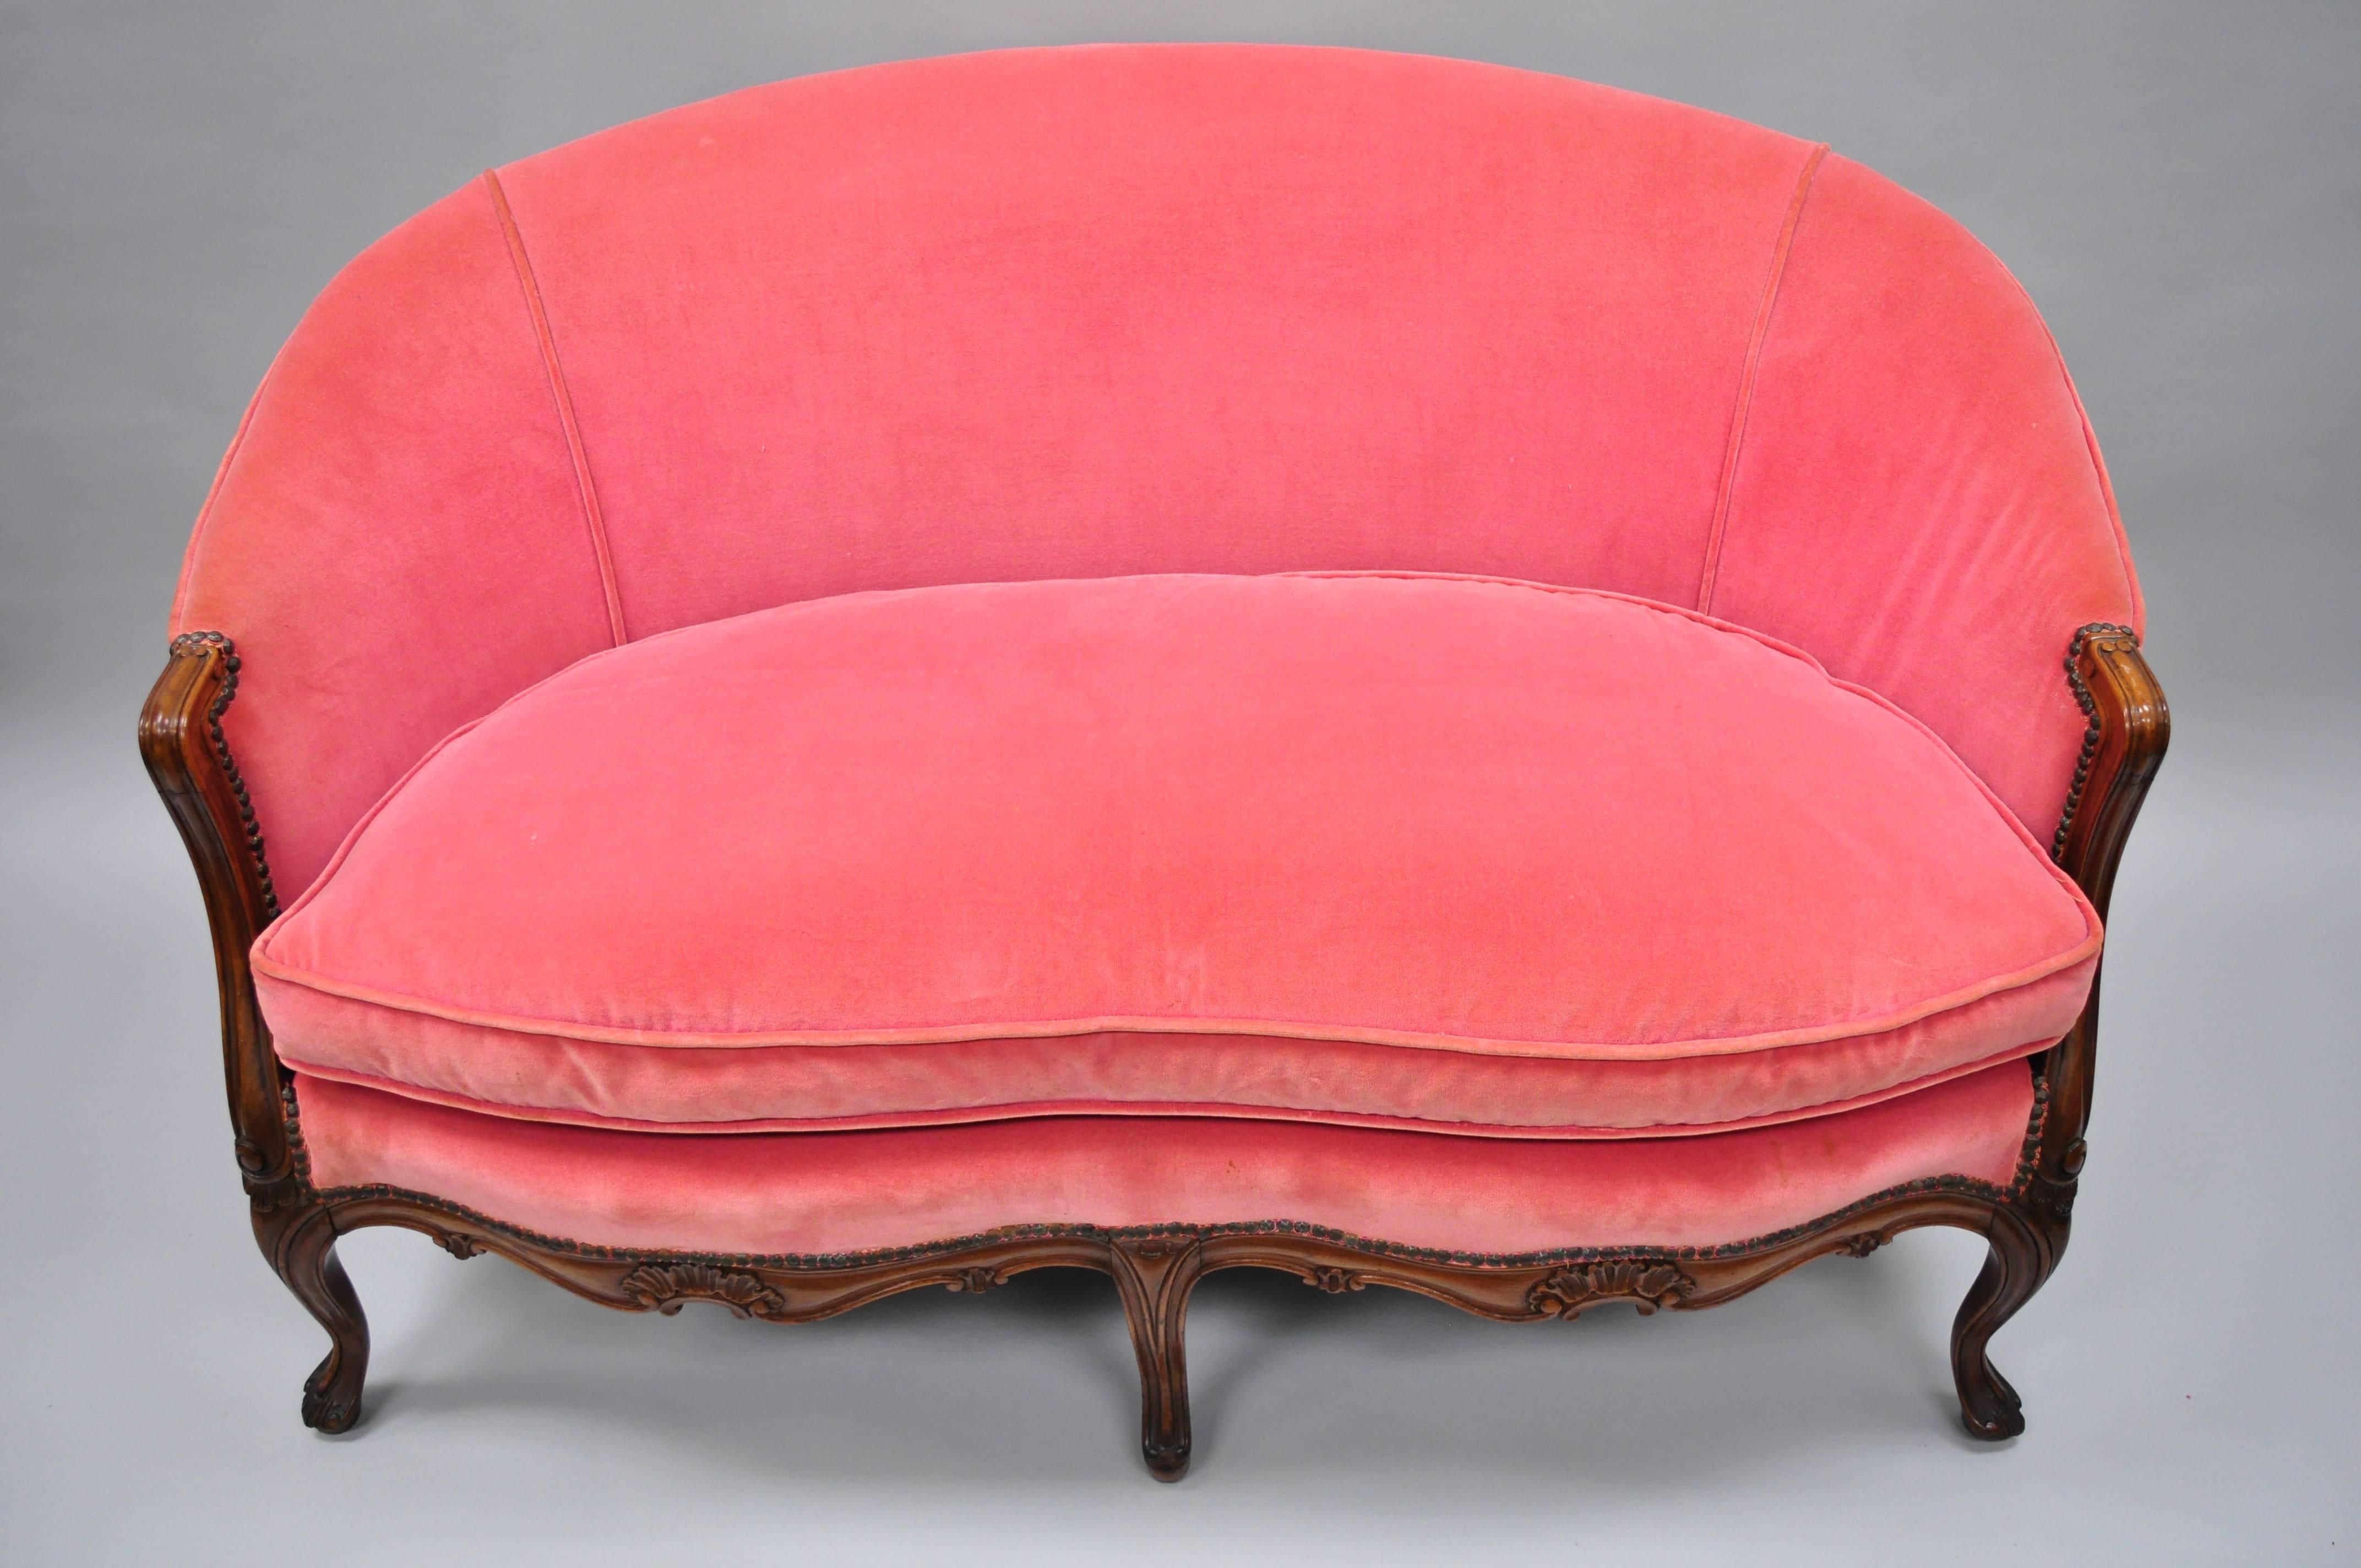 Antique French Louis XV Style Carved Walnut Settee Loveseat Canapé Pink Sofa 2